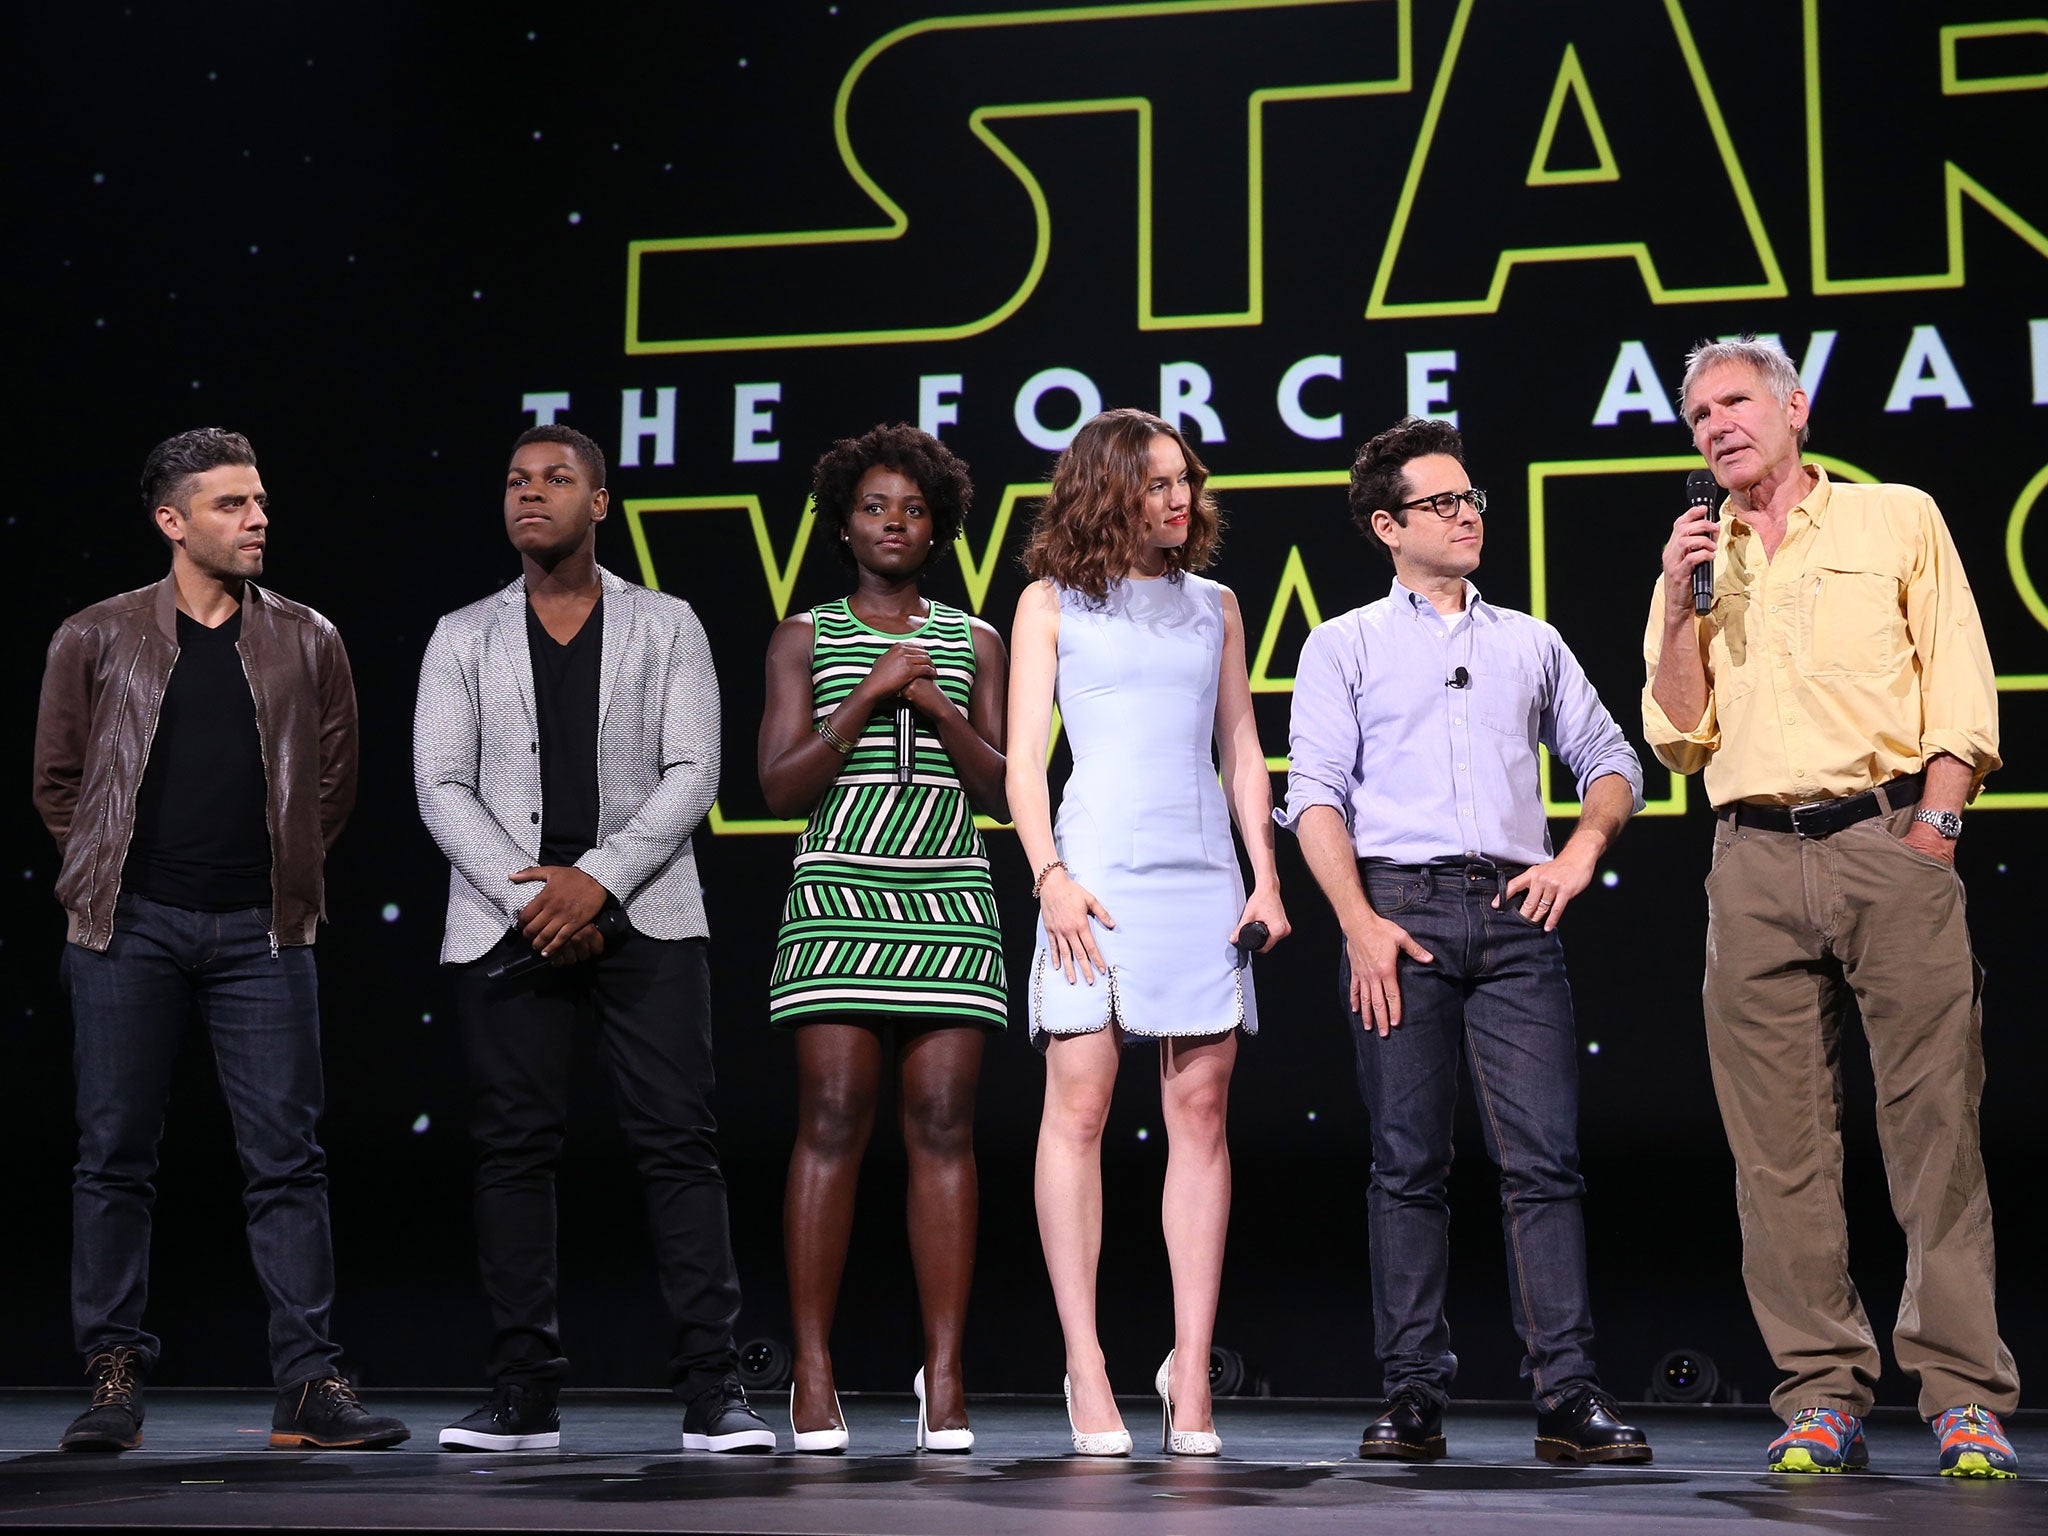 Just some of the cast from Star Wars: The Force Awakens. From Left to right, actors Oscar Isaac, John Boyega, Lupita Nyong'o, Daisy Ridley, director J.J. Abrams and actor Harrison Ford